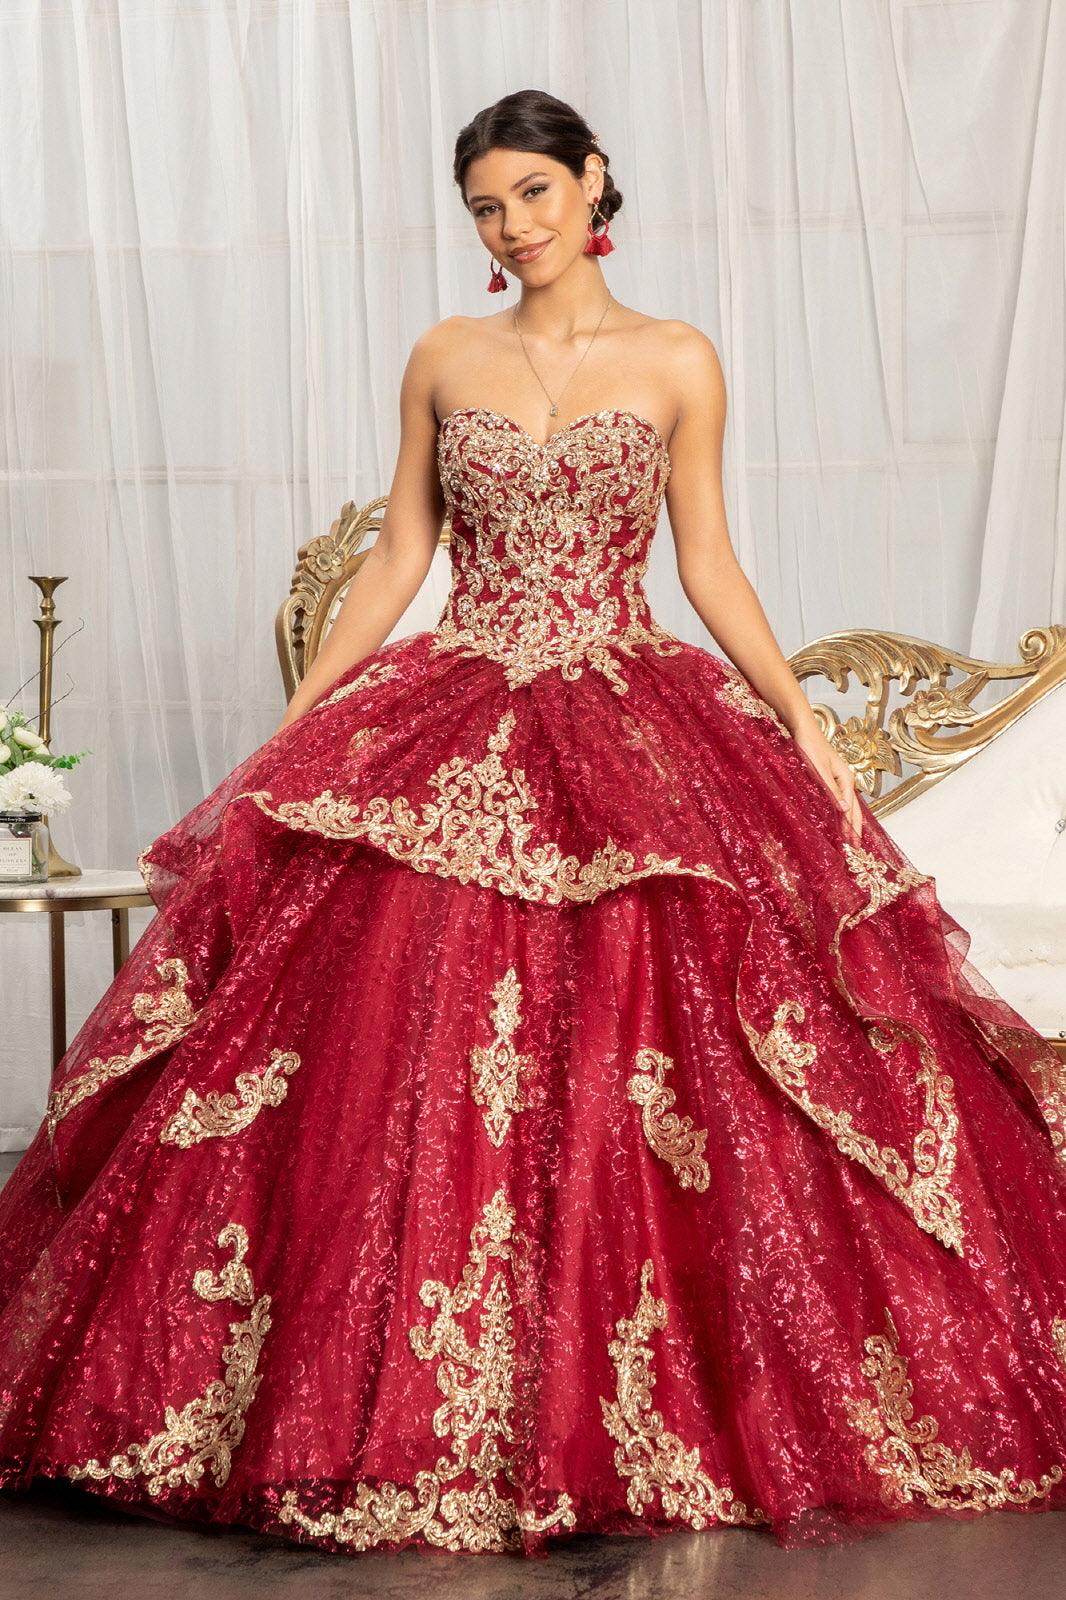 Burgundy Long Strapless Ball Gown Glitter Quinceanera Dress for $806.99, –  The Dress Outlet